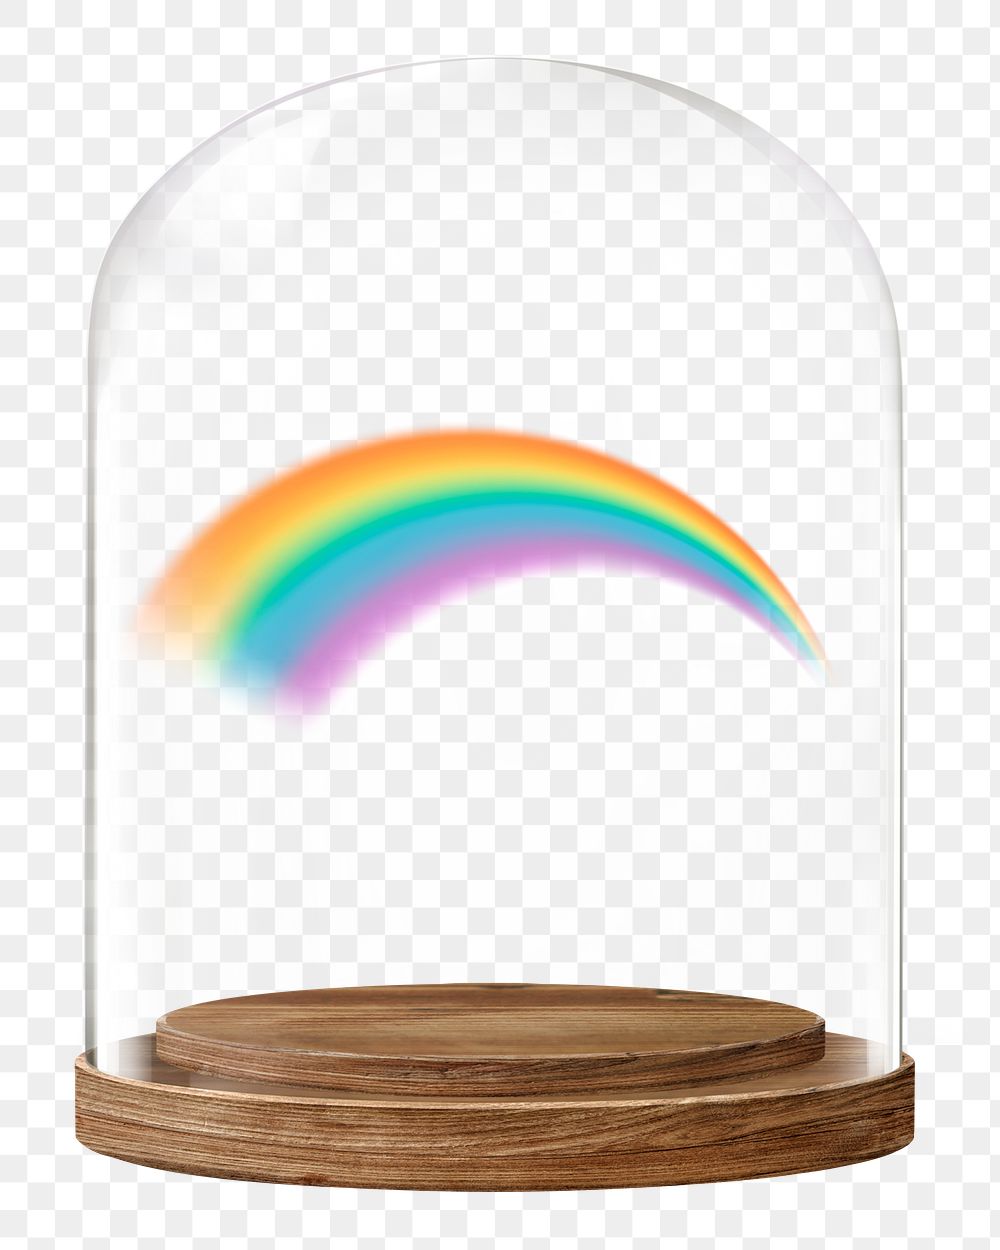 Rainbow png glass dome sticker, weather concept art, transparent background